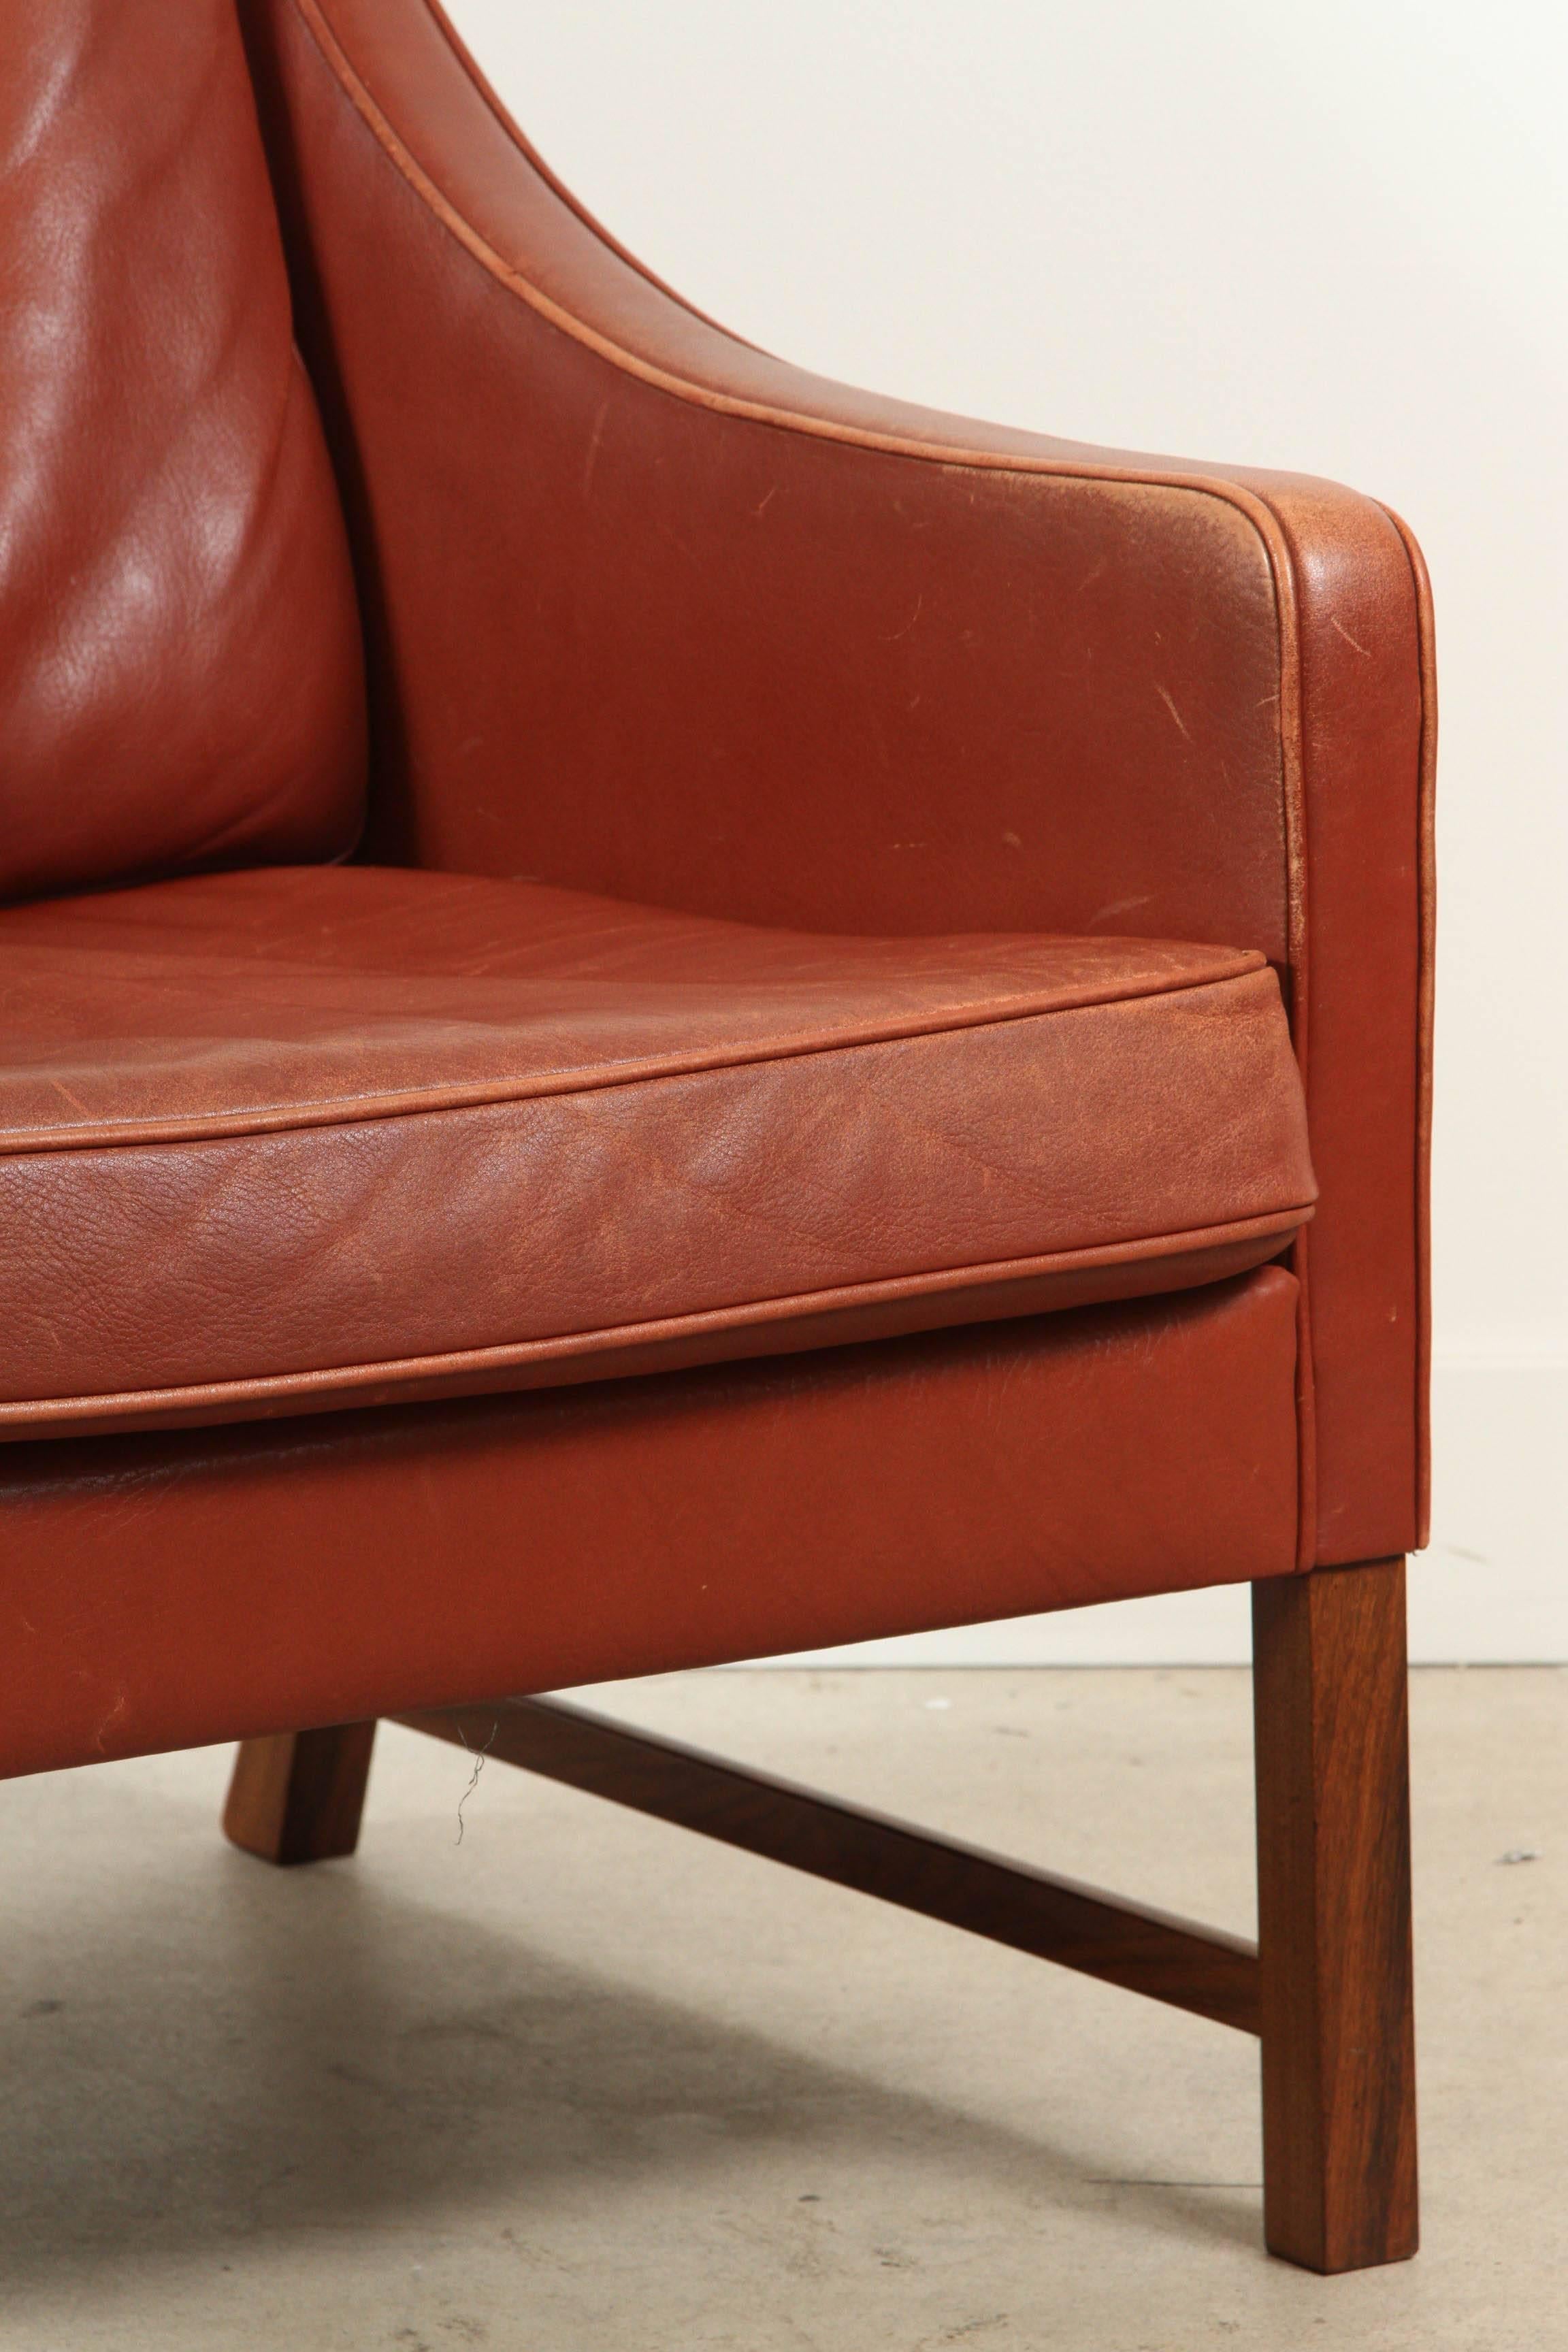 Danish leather club chair with rosewood base by Frederik Kayser for Vatne Møbler.